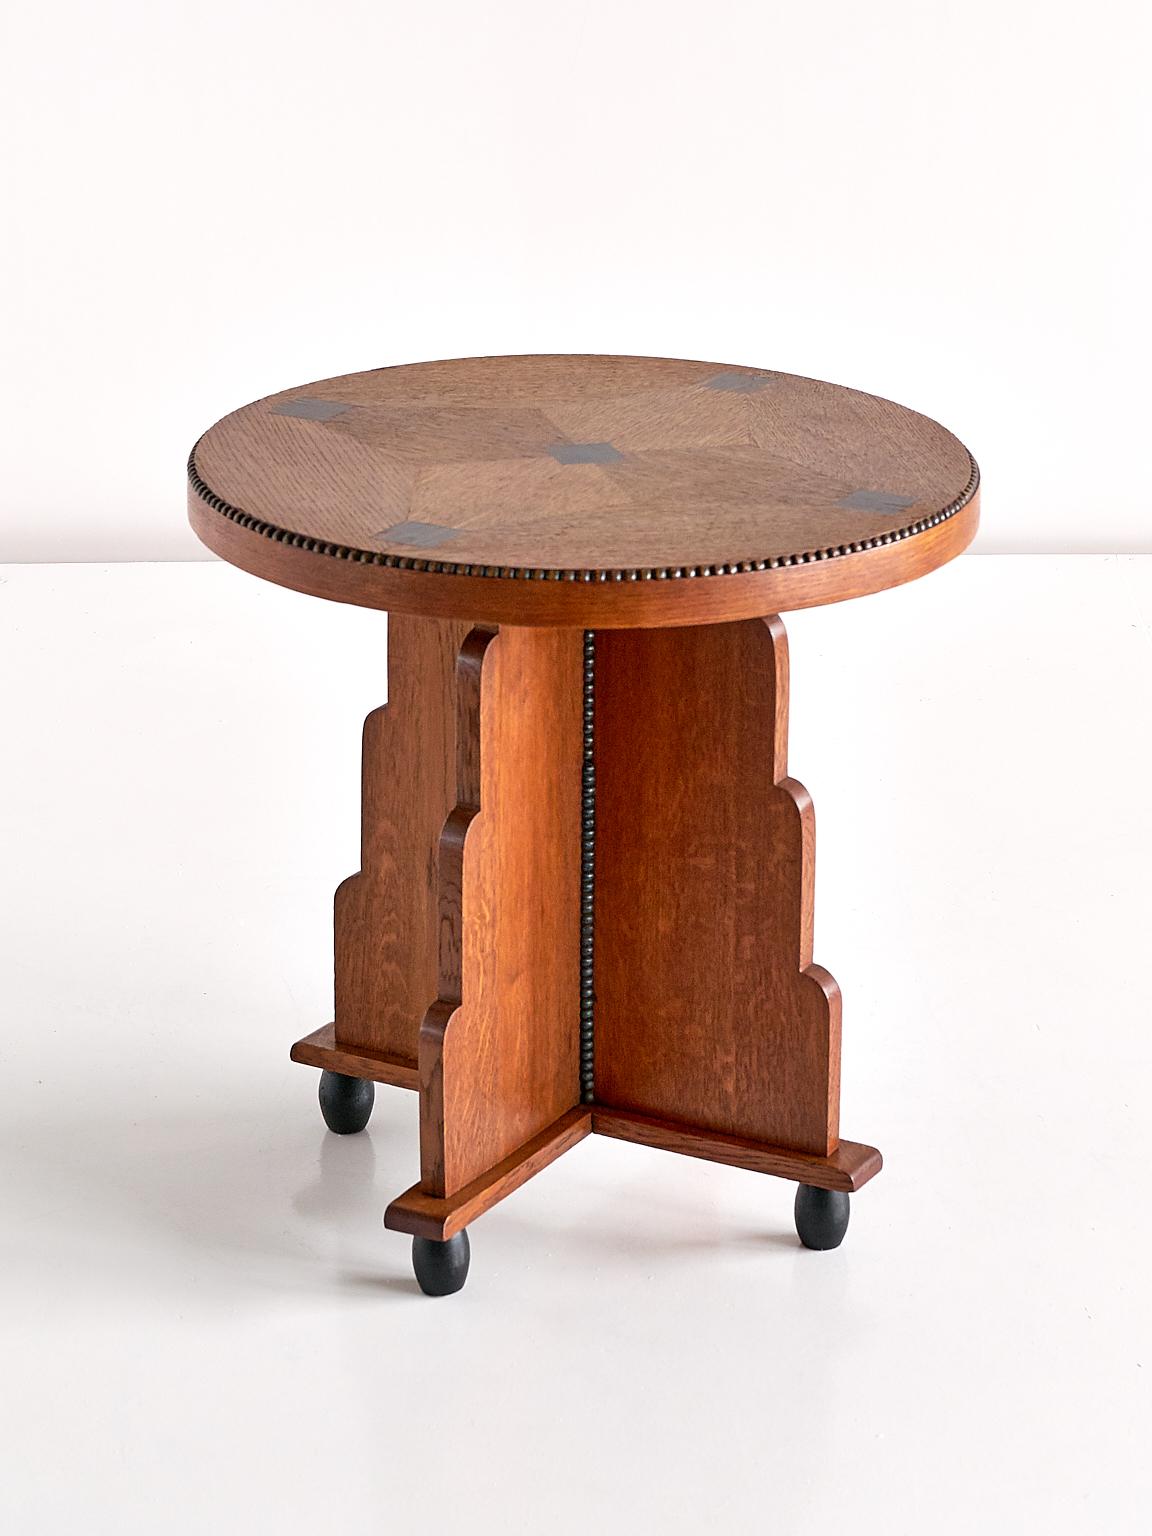 This elegant Art Deco side table was produced in The Netherlands in the early 1930s. The tiered base in solid oak stands on four rounded feet in dark stained oak. The striking round top is inlaid with a geometric pattern in veneered oak and veneered